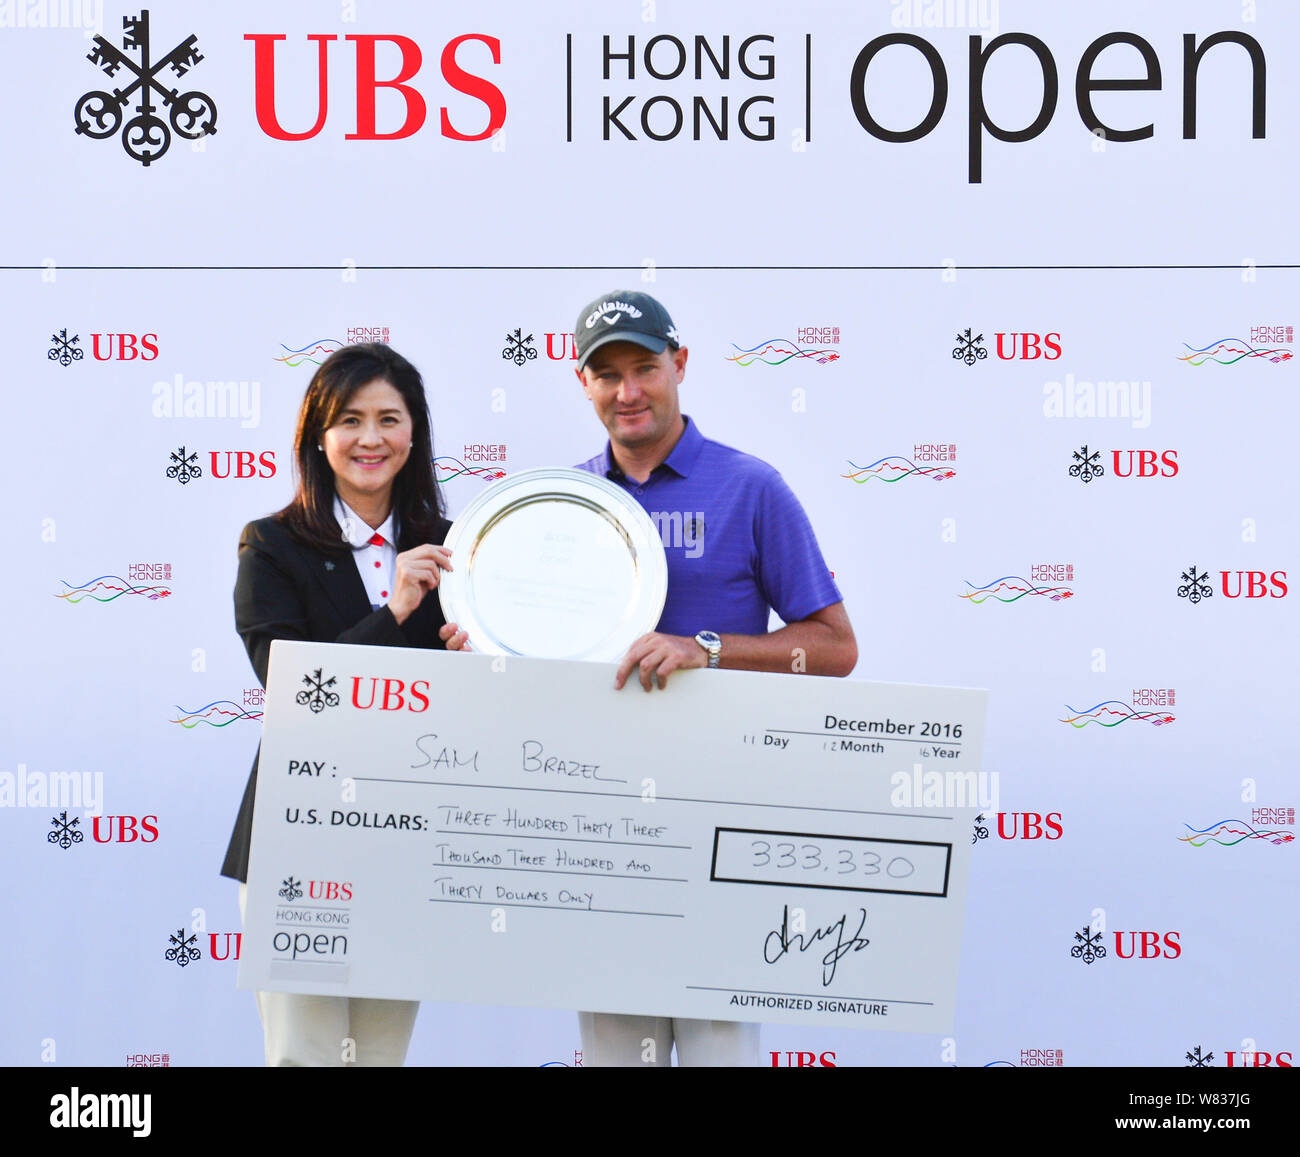 Australian golfer Sam Brazel, right, poses with his trophy after winning the UBS Hong Kong Open 2016 at The Hong Kong Golf Club Fanling in Hong Kong, Stock Photo